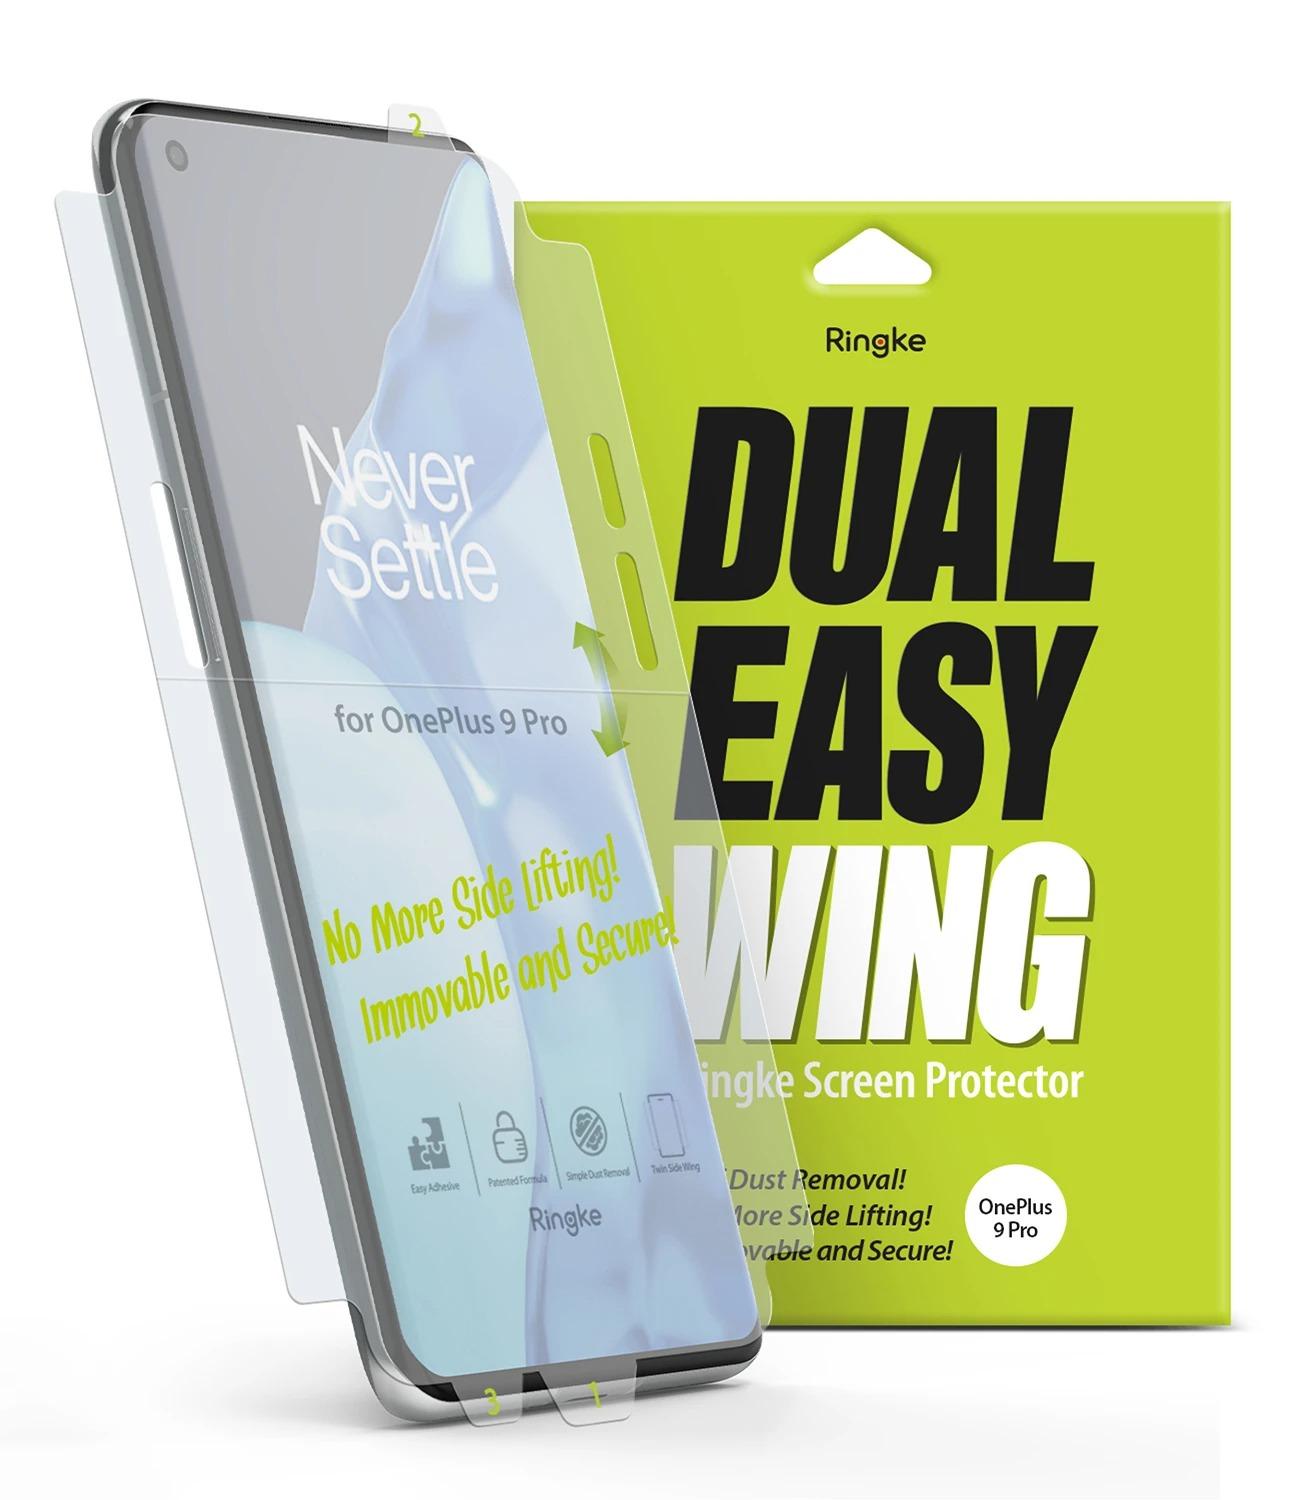 Ringke DualEasy Wing Compatible For OnePlus 9 Pro Screen Protector Full Coverage (Pack of 2) Dual Easy Film Case Friendly Protective Film [ Designed Screen Guard For OnePlus 9 Pro ] - Clear